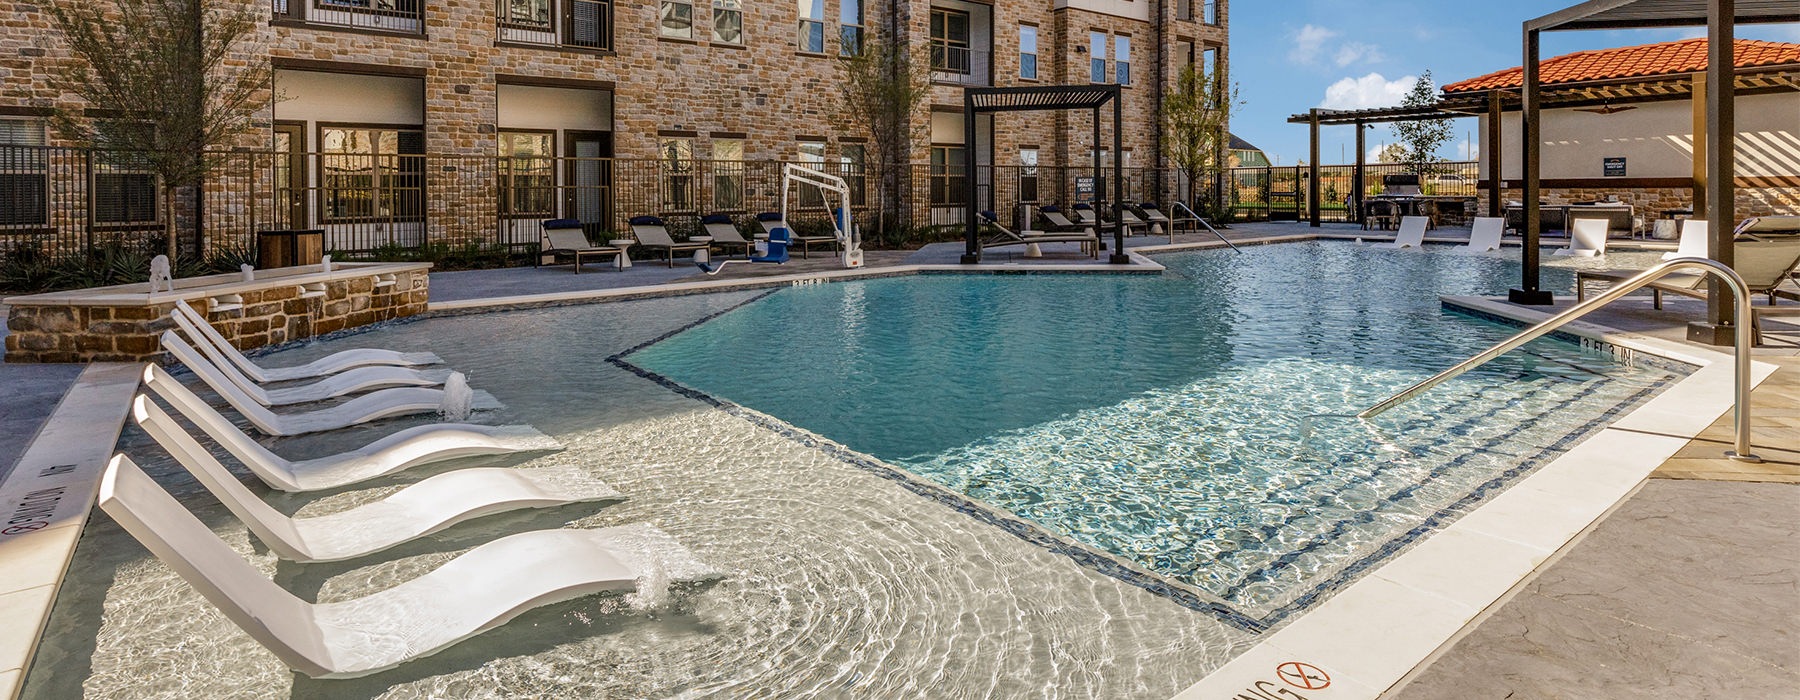 Large sparkling pool with large pool deck and lounge chairs